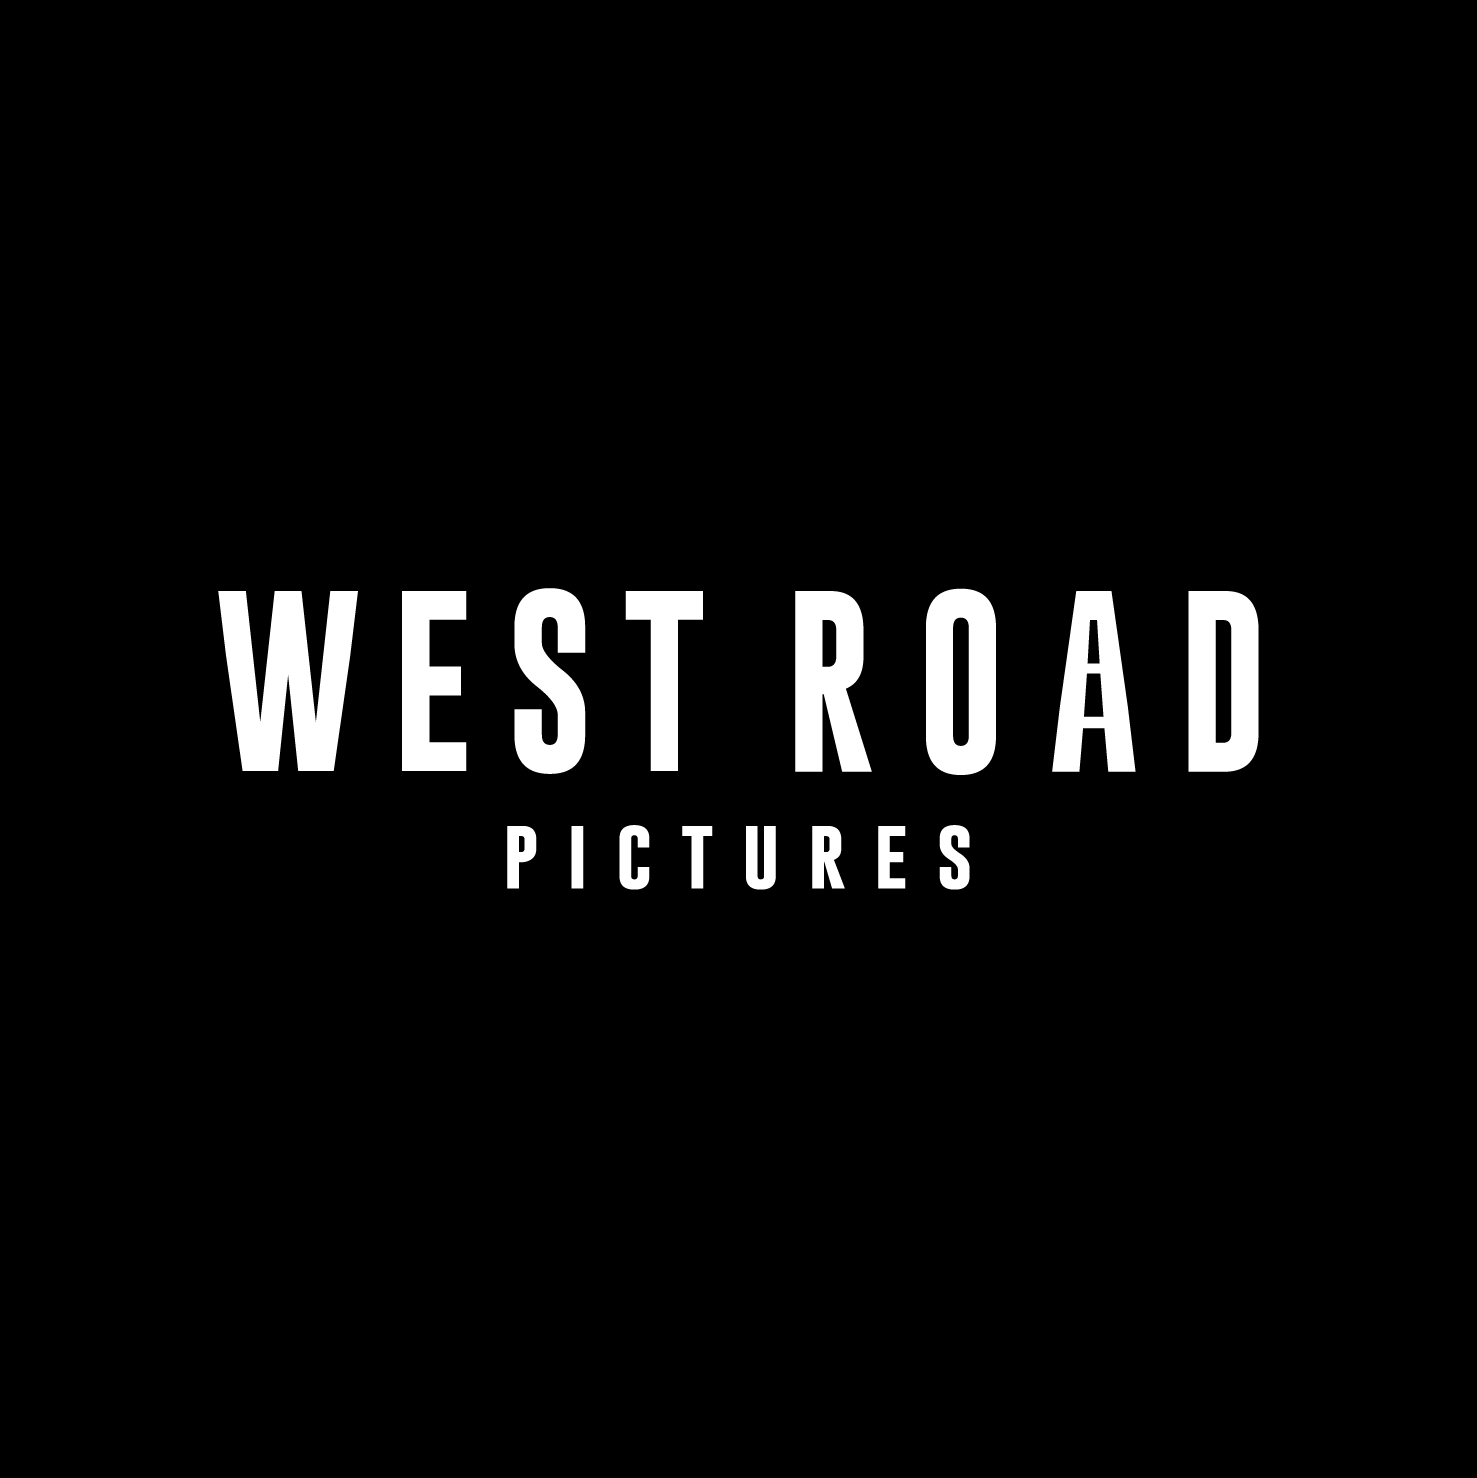 WEST ROAD PICTURES LOGOS-02.png